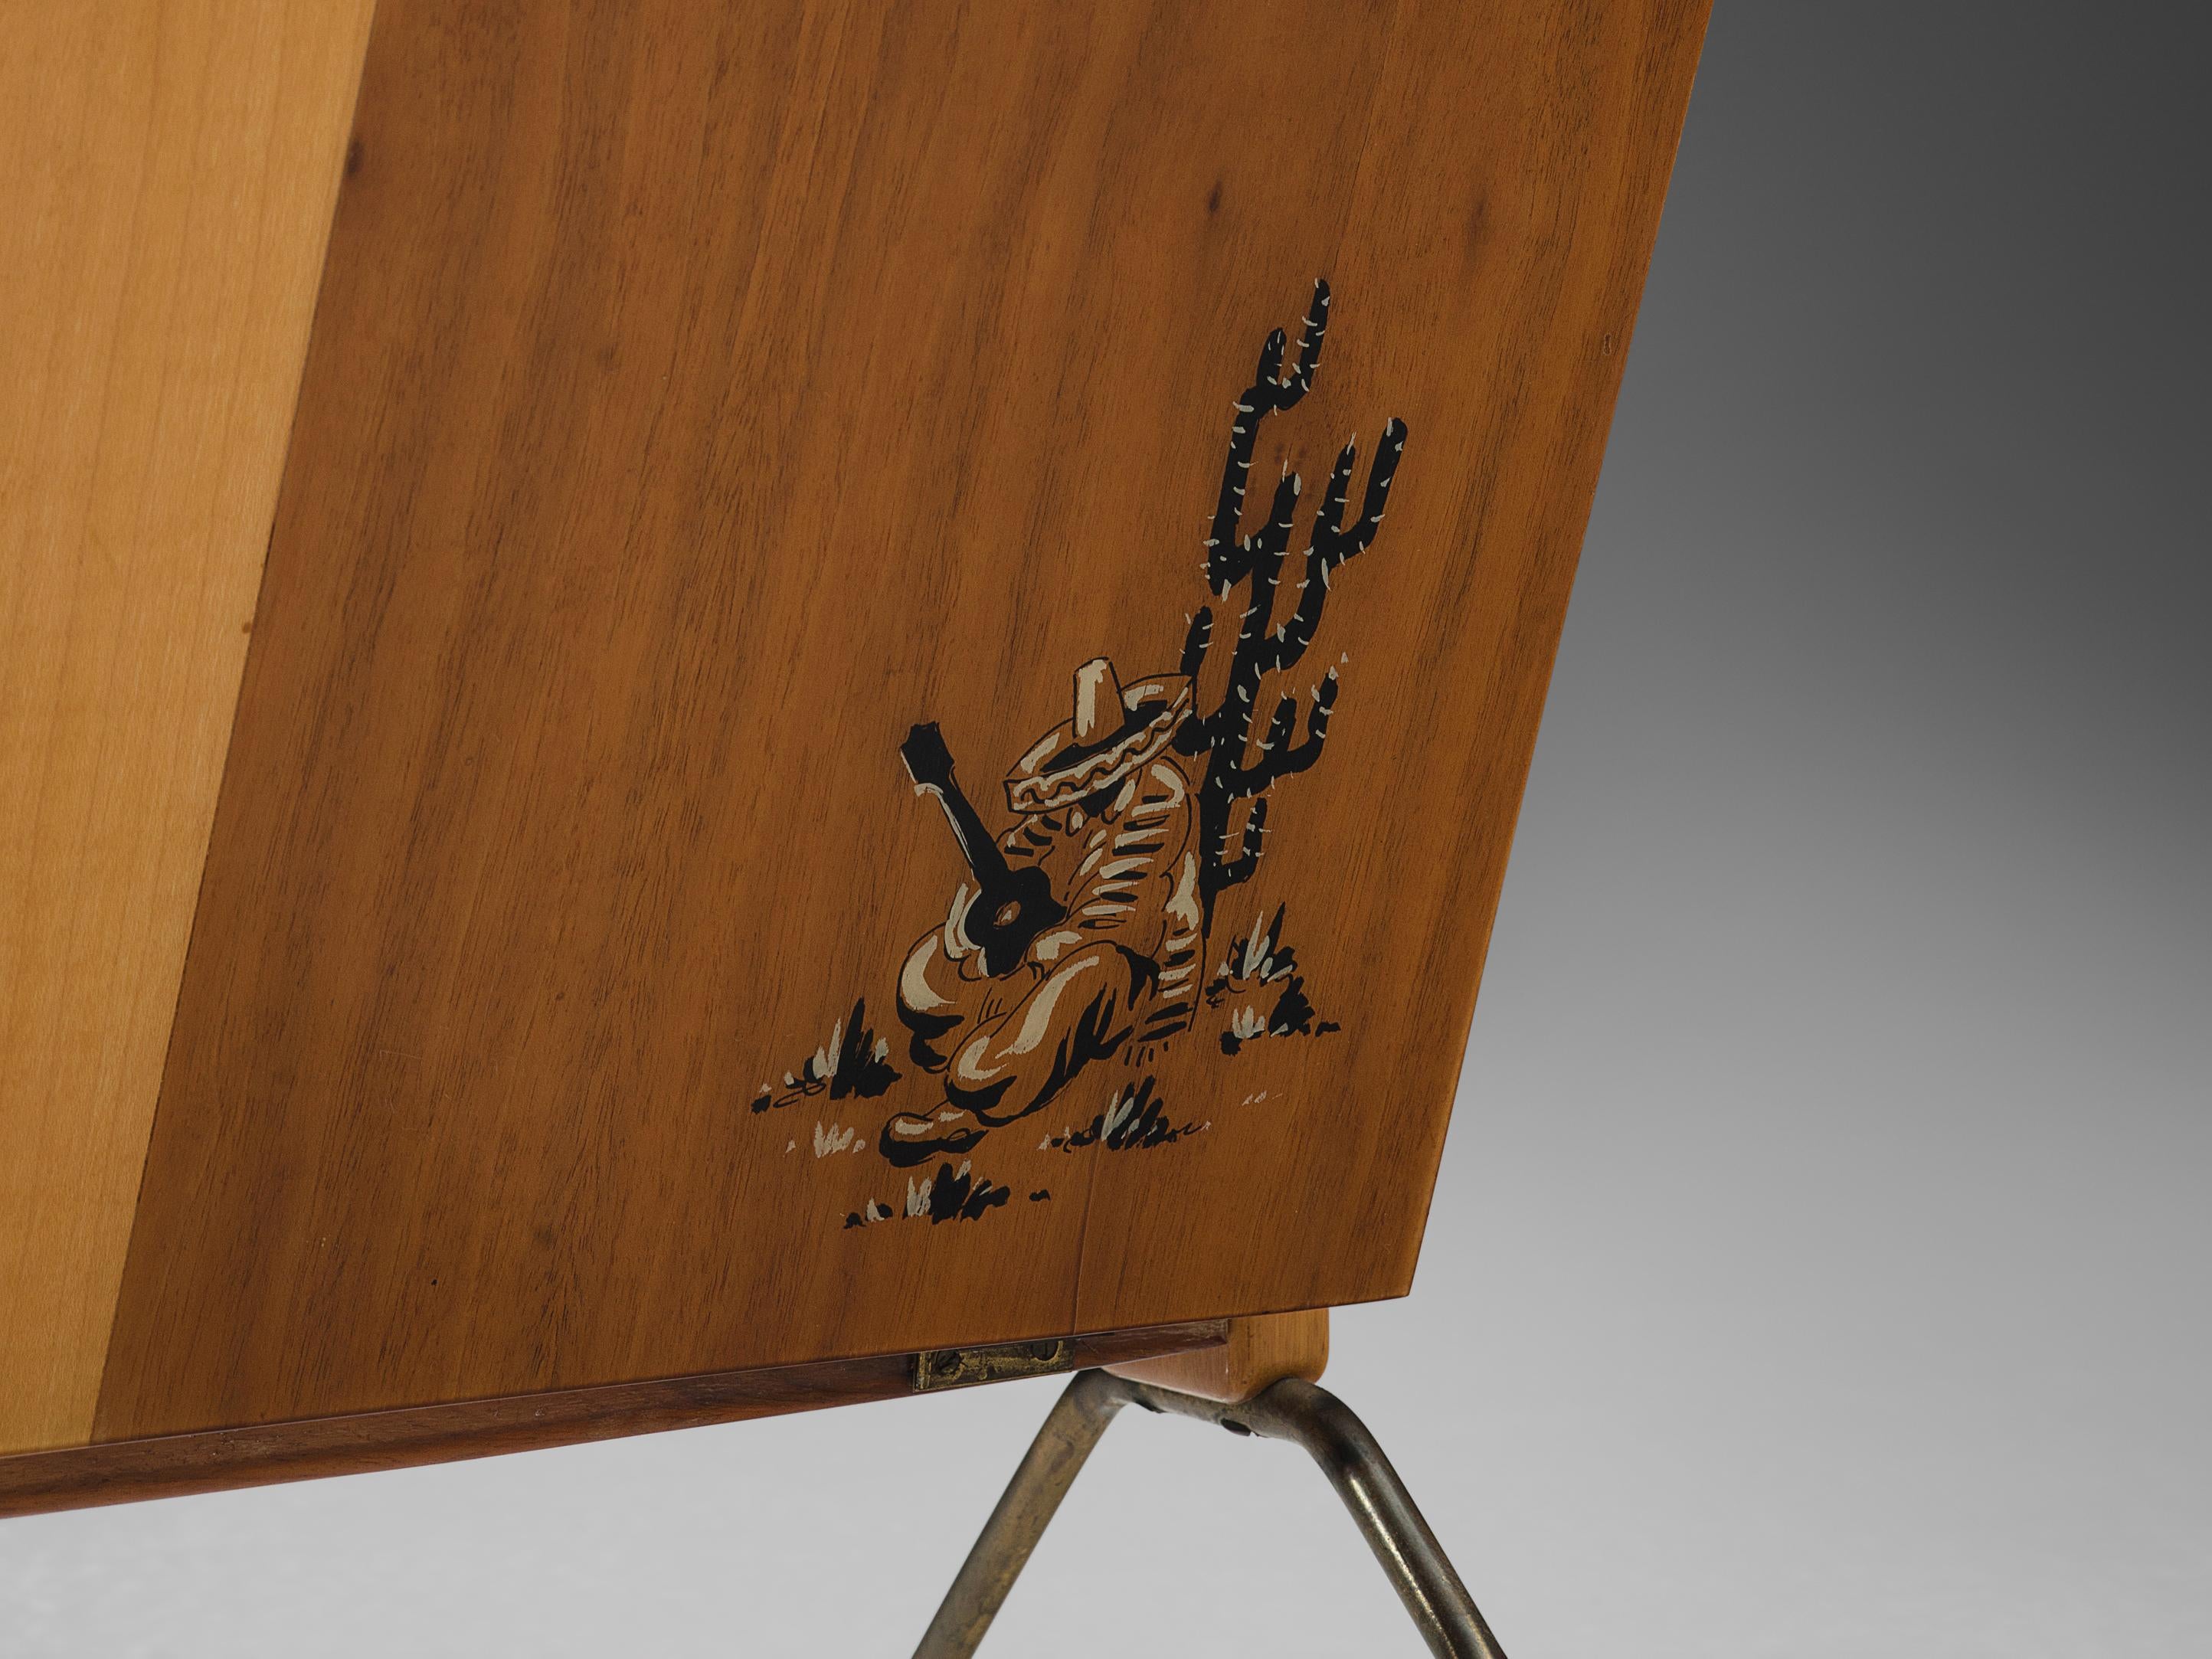 Italian Foldable Magazine Rack in Walnut and Brass with Illustrations